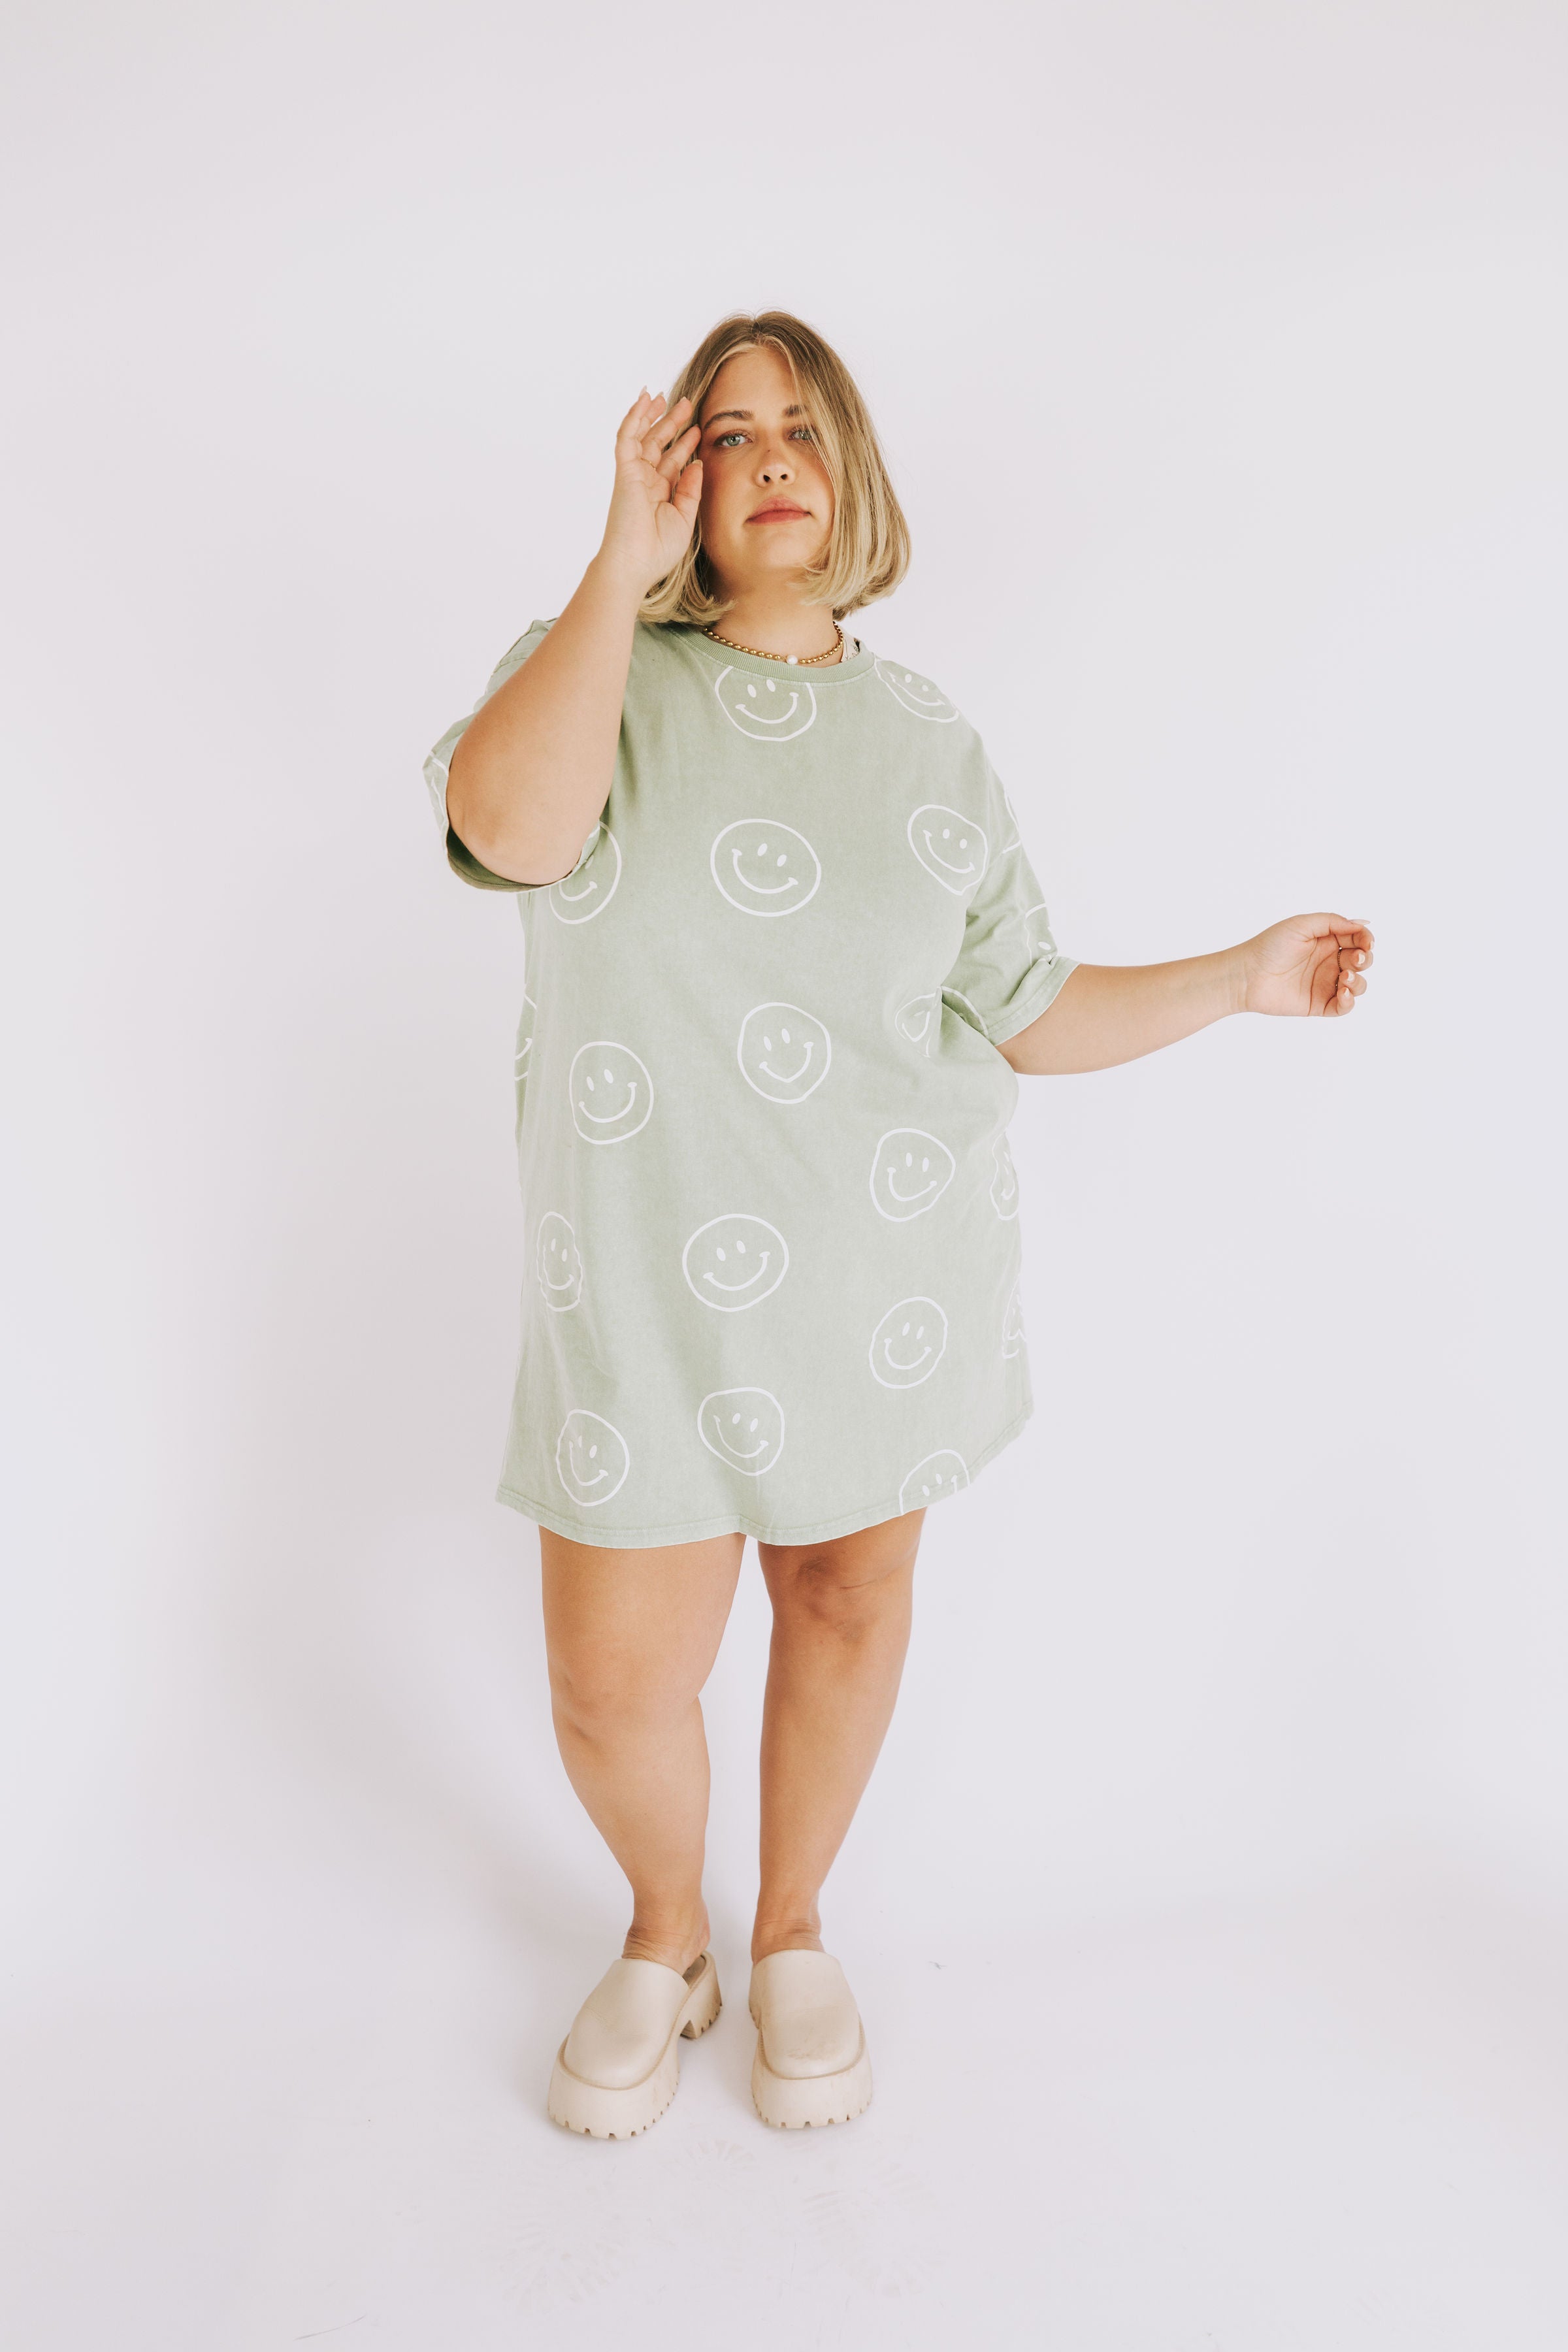 PLUS SIZE - Smile Says It All Dress - New Color!